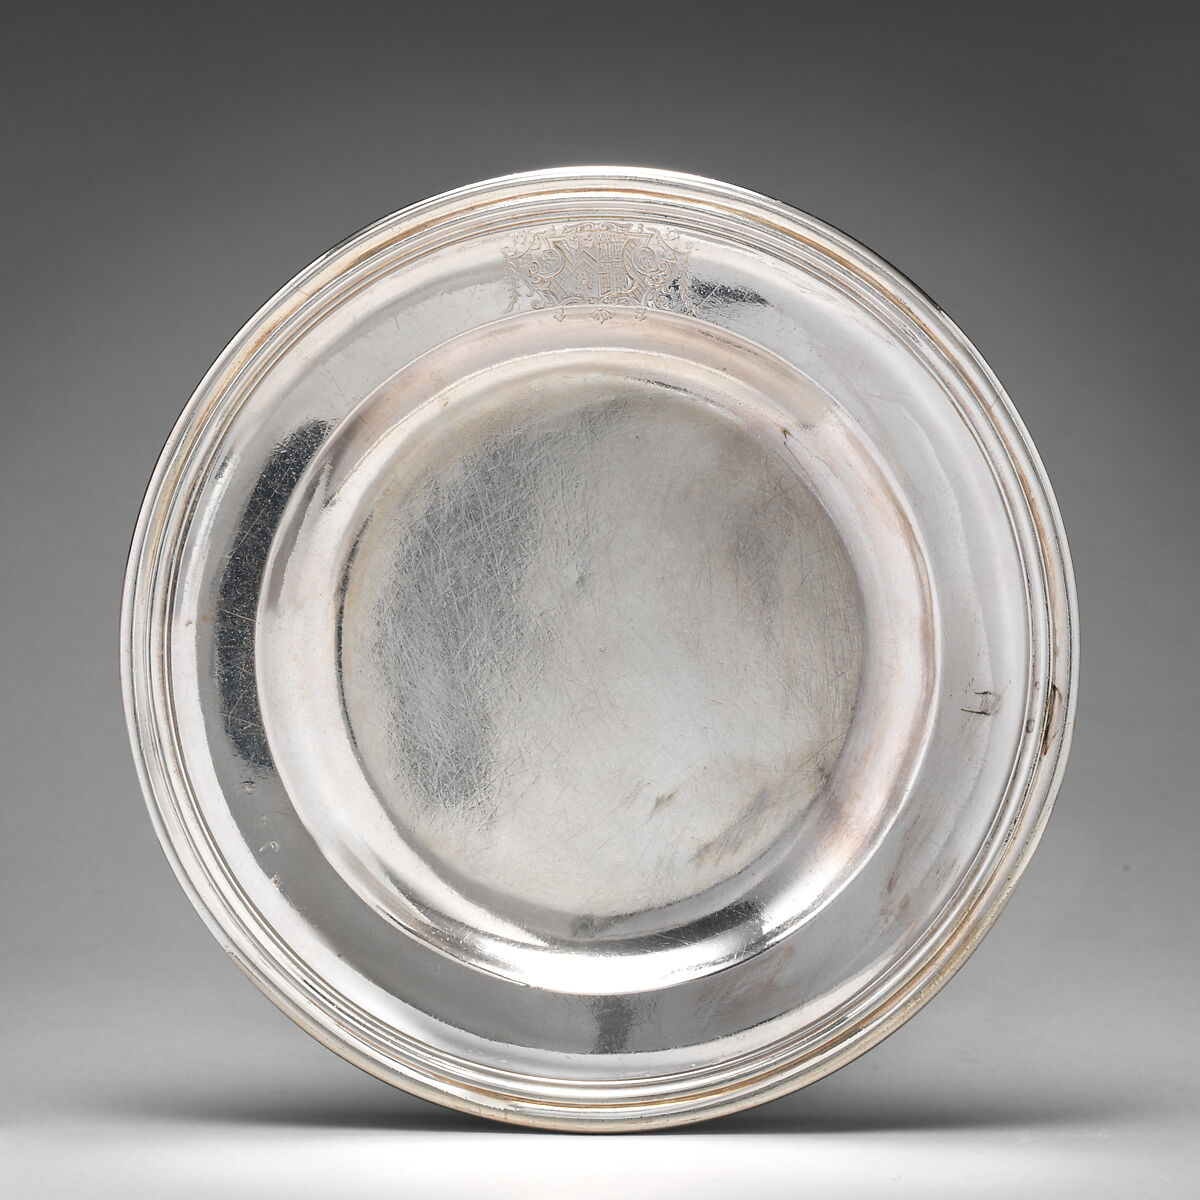 Dinner plate with English arms (one of a group of four), Richard Bayley (British, active 1708–48), Silver, British, London 